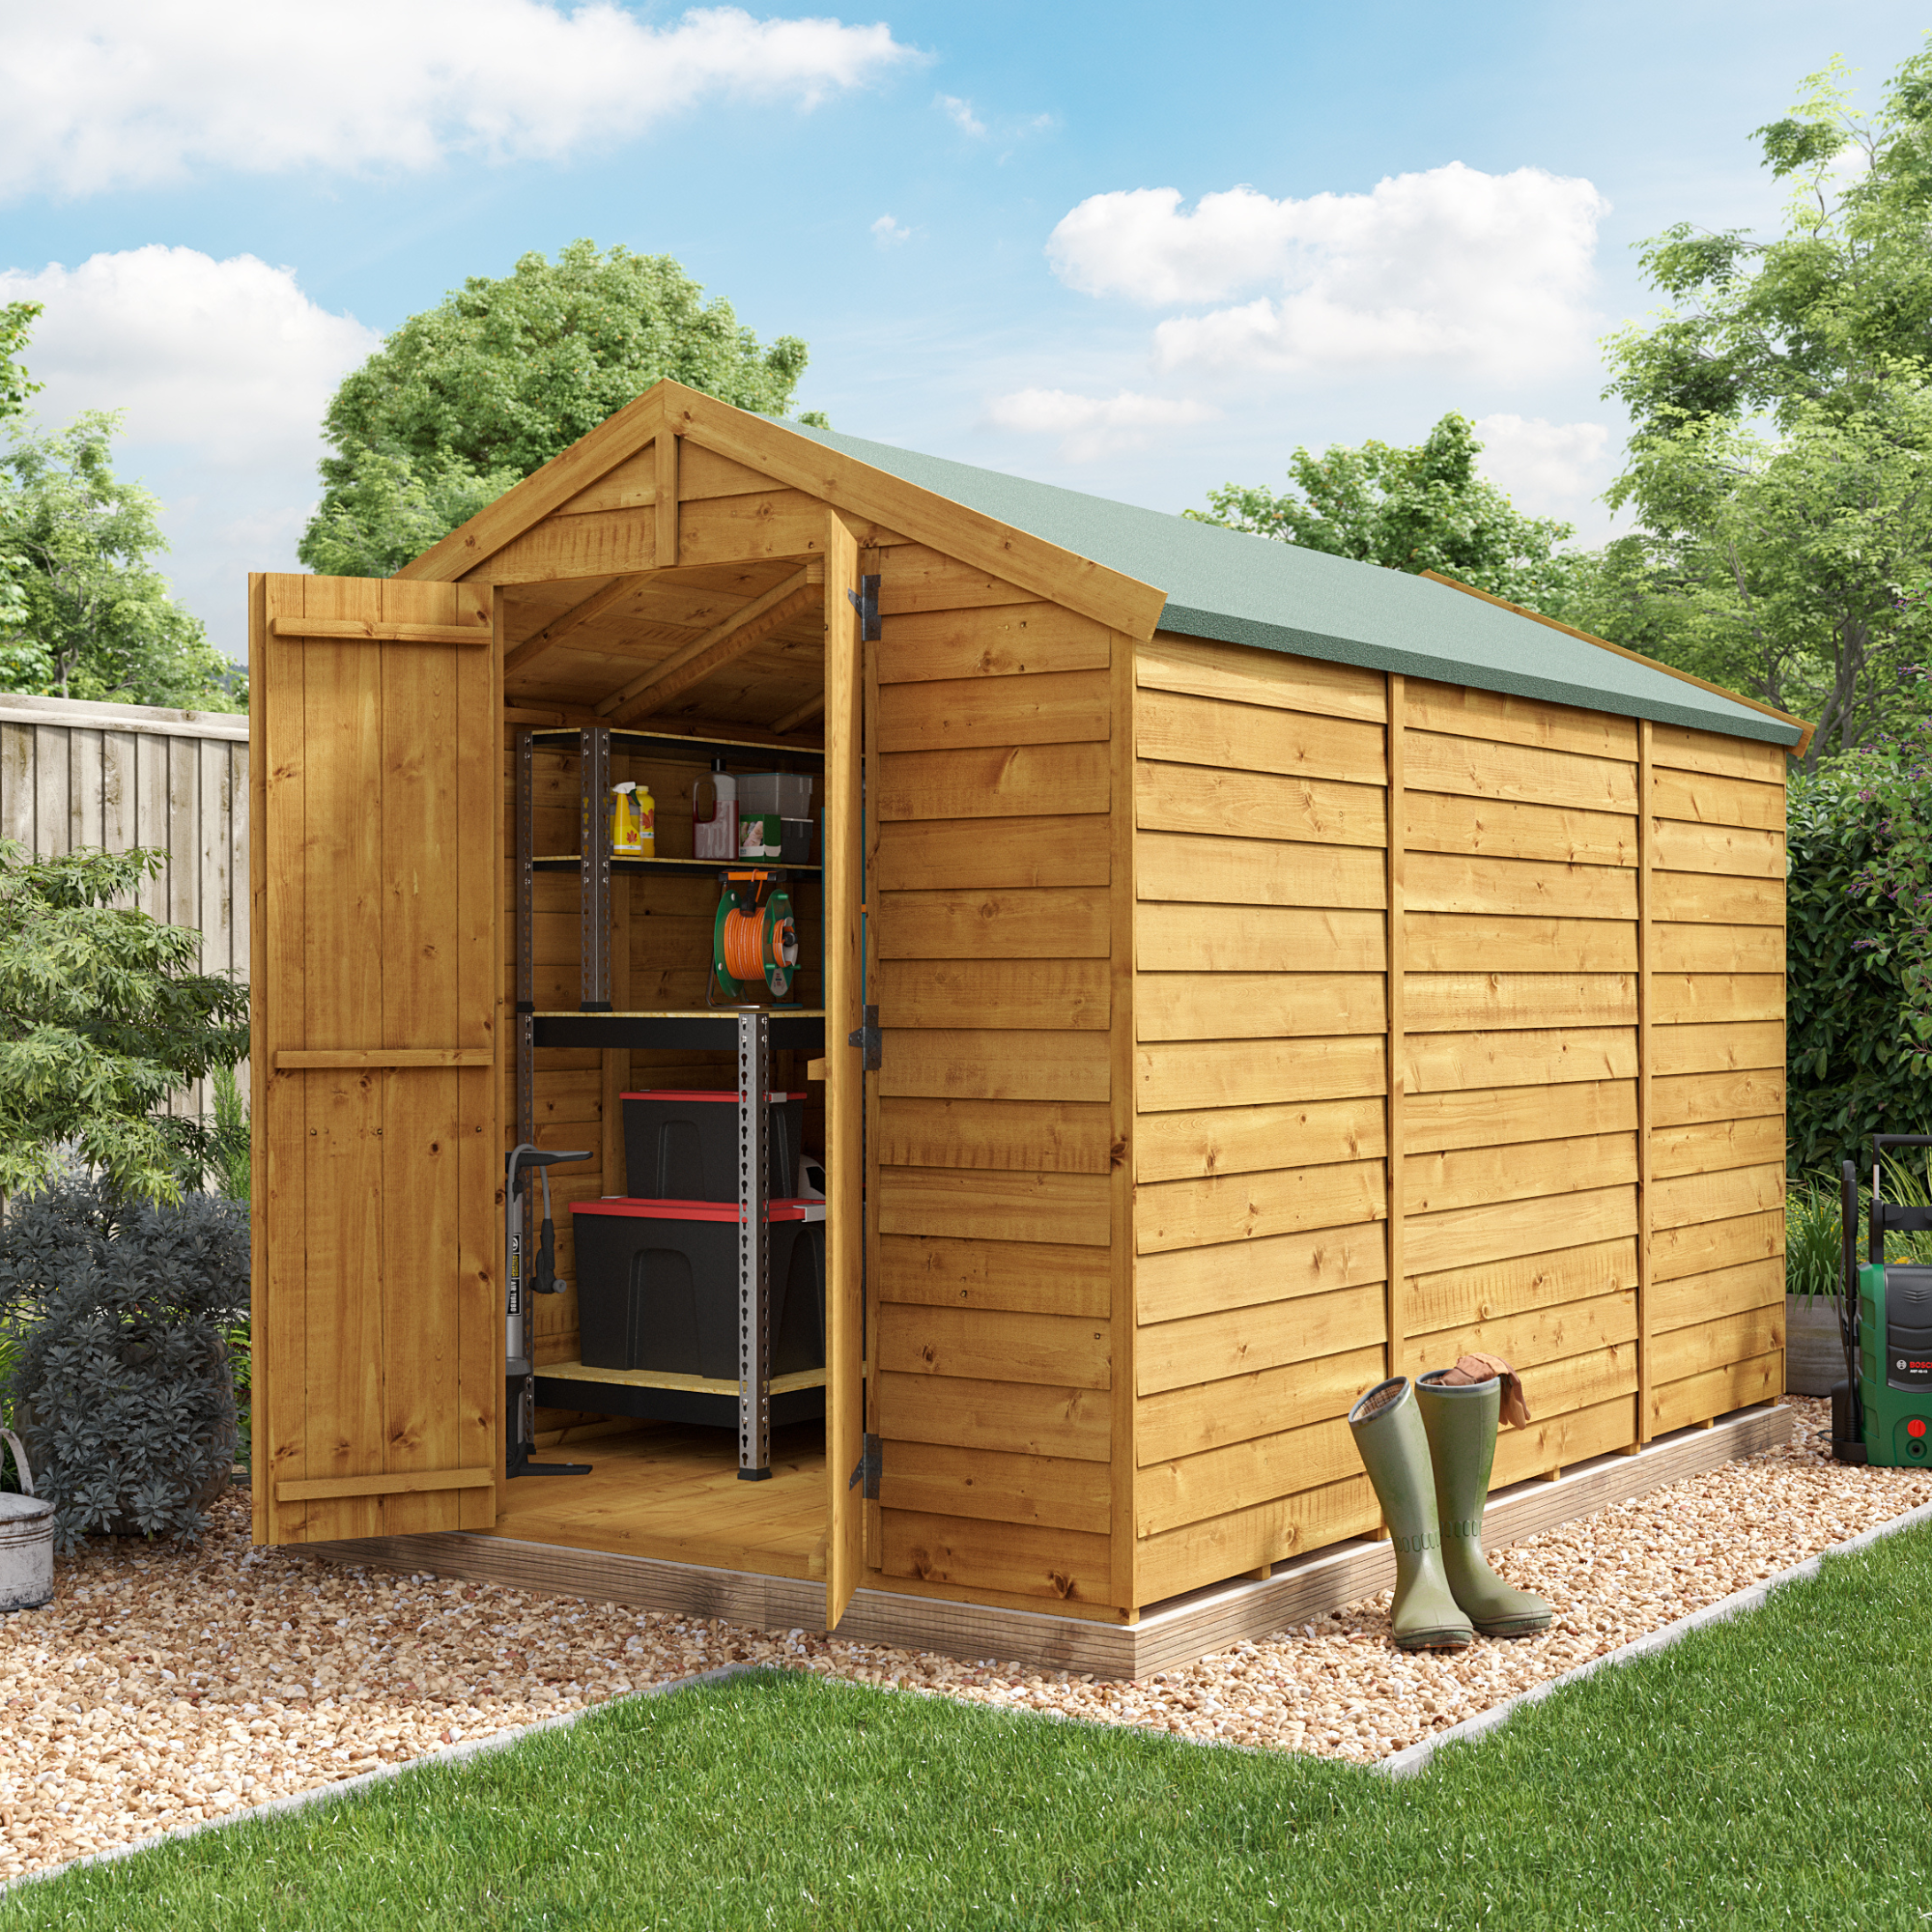 10 x 6 Pressure Treated Shed - BillyOh Keeper Overlap Apex Wooden Shed - Windowless 10x6 Garden Shed